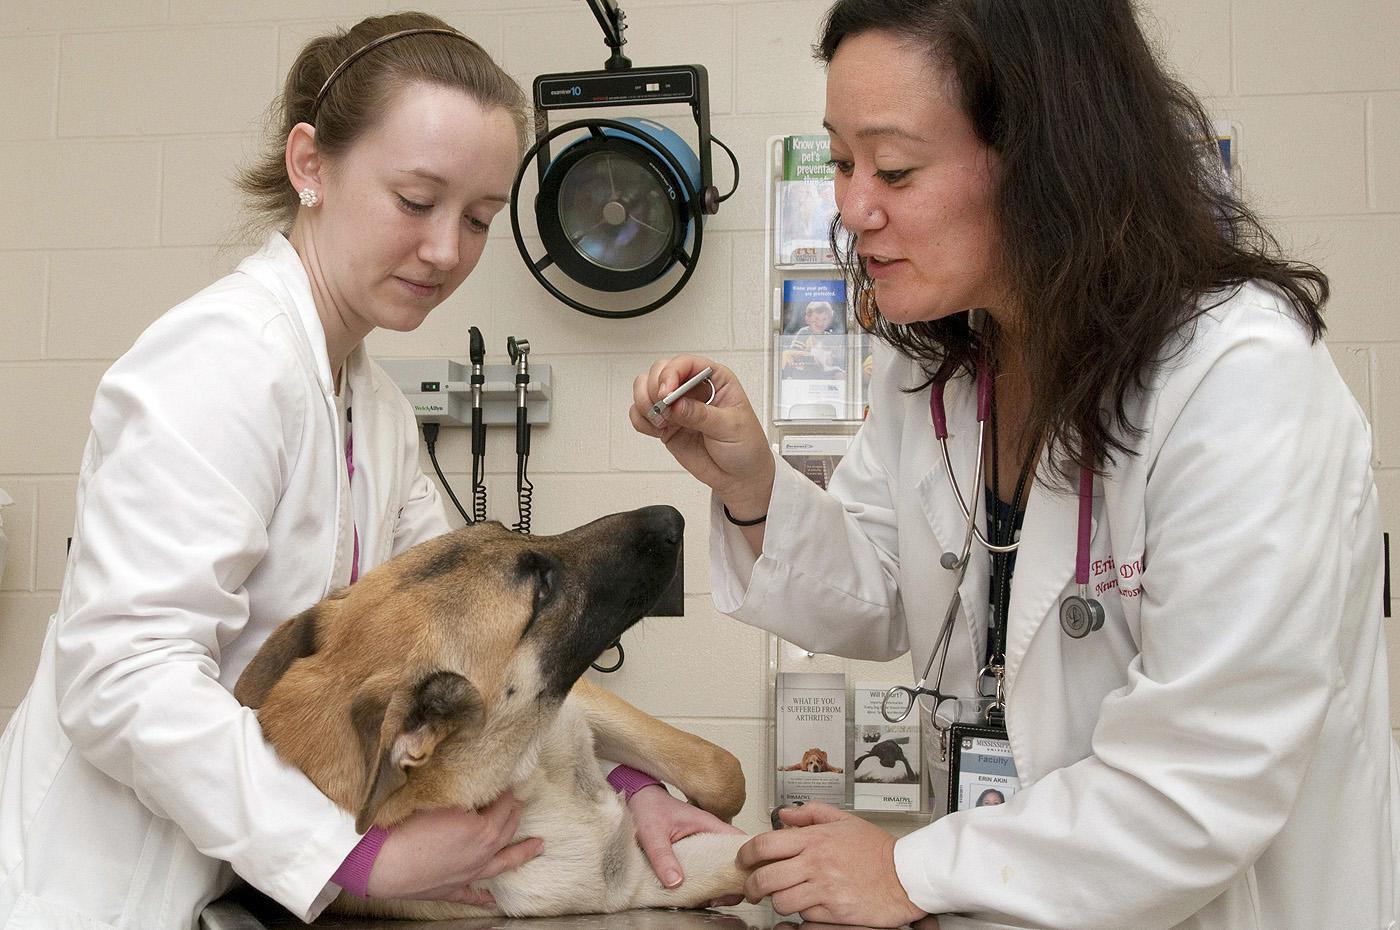 Dr. Michaela Beasley, a neurology resident at Mississippi State University's College of Veterinary Medicine, left, assists Dr. Erin Akin, a neurology clinical instructor, as she performs a neurology exam on a patient. (Photo by Tom Thompson)